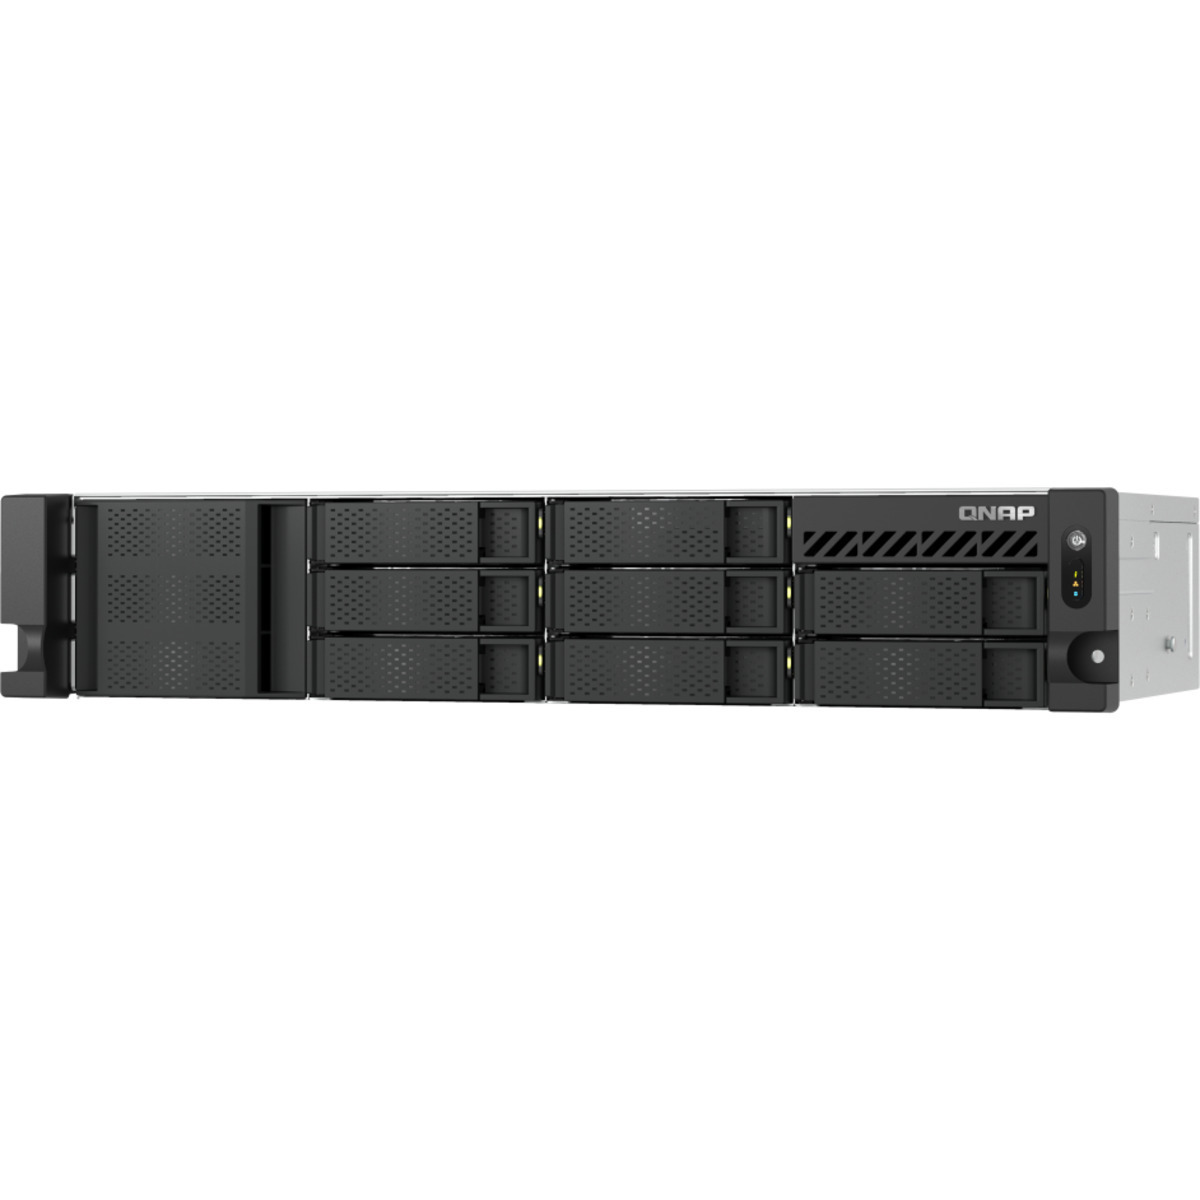 QNAP TS-855eU 56tb 8-Bay RackMount Multimedia / Power User / Business NAS - Network Attached Storage Device 4x14tb Seagate IronWolf Pro ST14000NT001 3.5 7200rpm SATA 6Gb/s HDD NAS Class Drives Installed - Burn-In Tested - FREE RAM UPGRADE TS-855eU